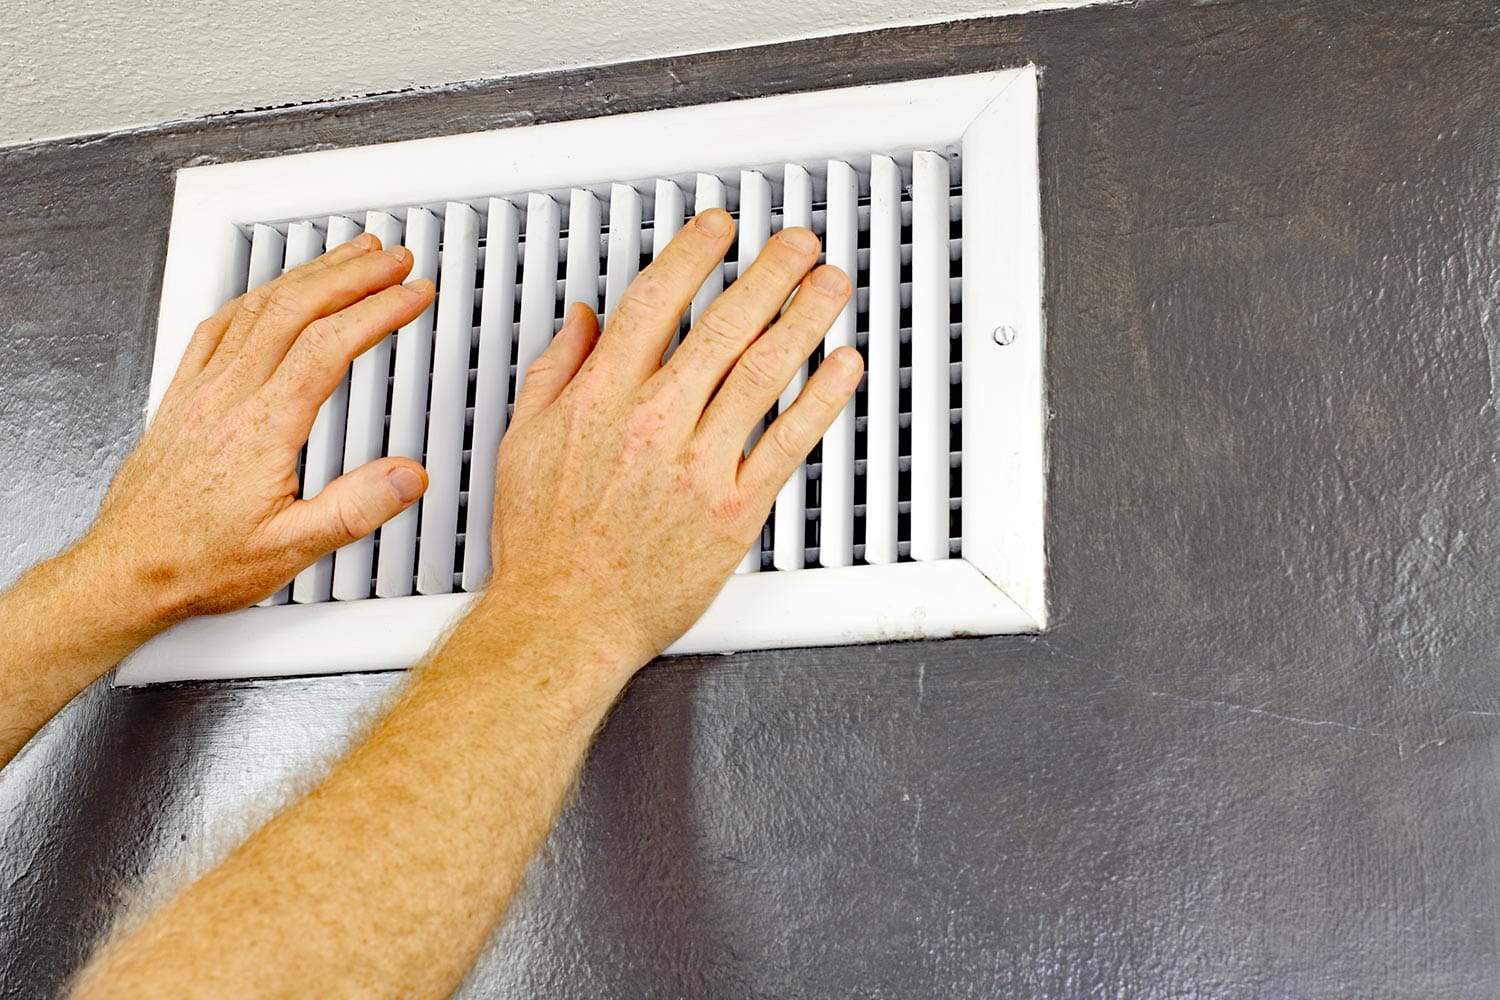 Two hands in front of an air vent